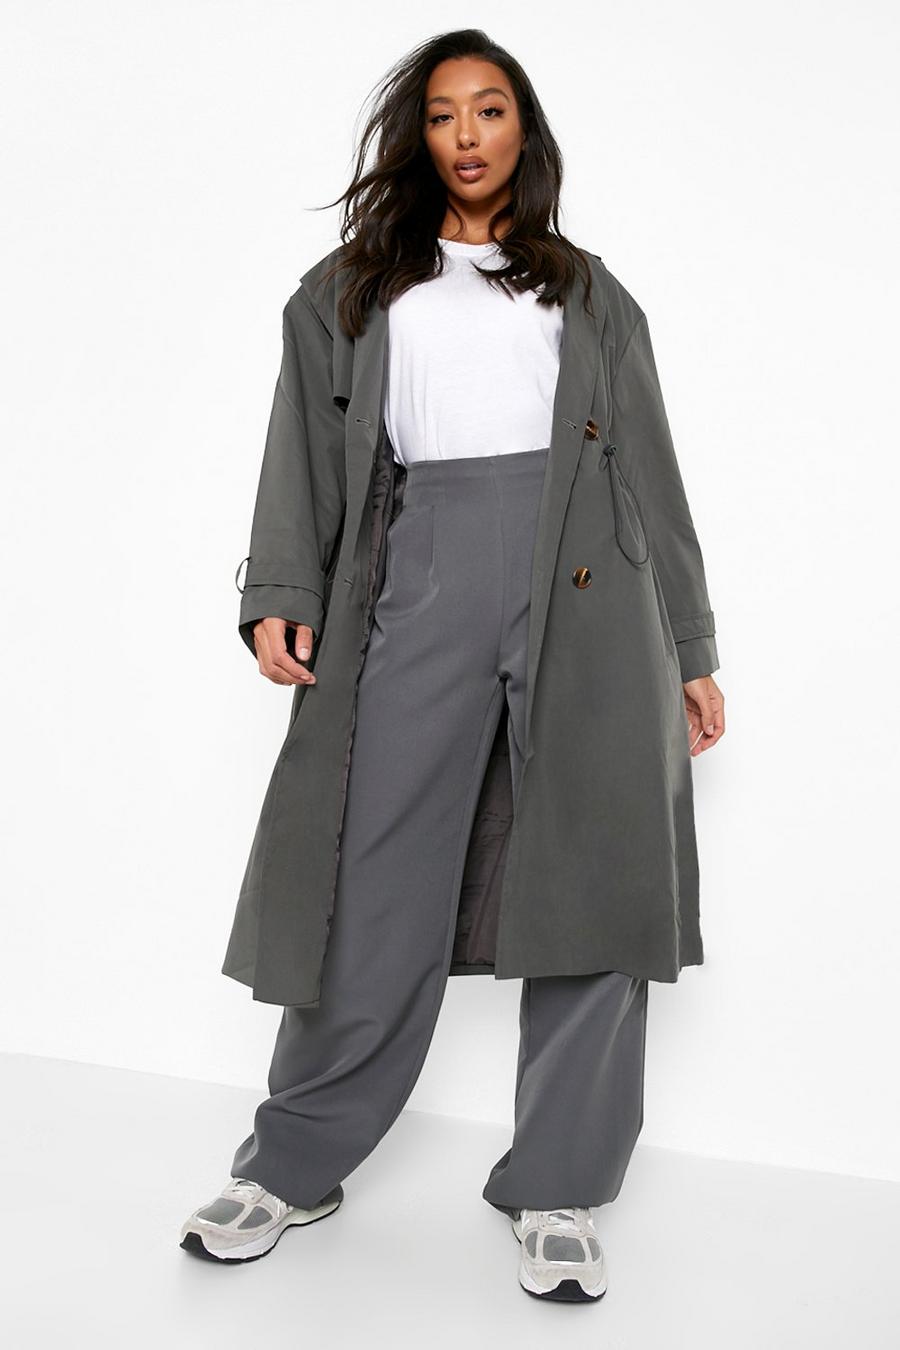 Charcoal grey Synch Waist Hooded Trench Coat